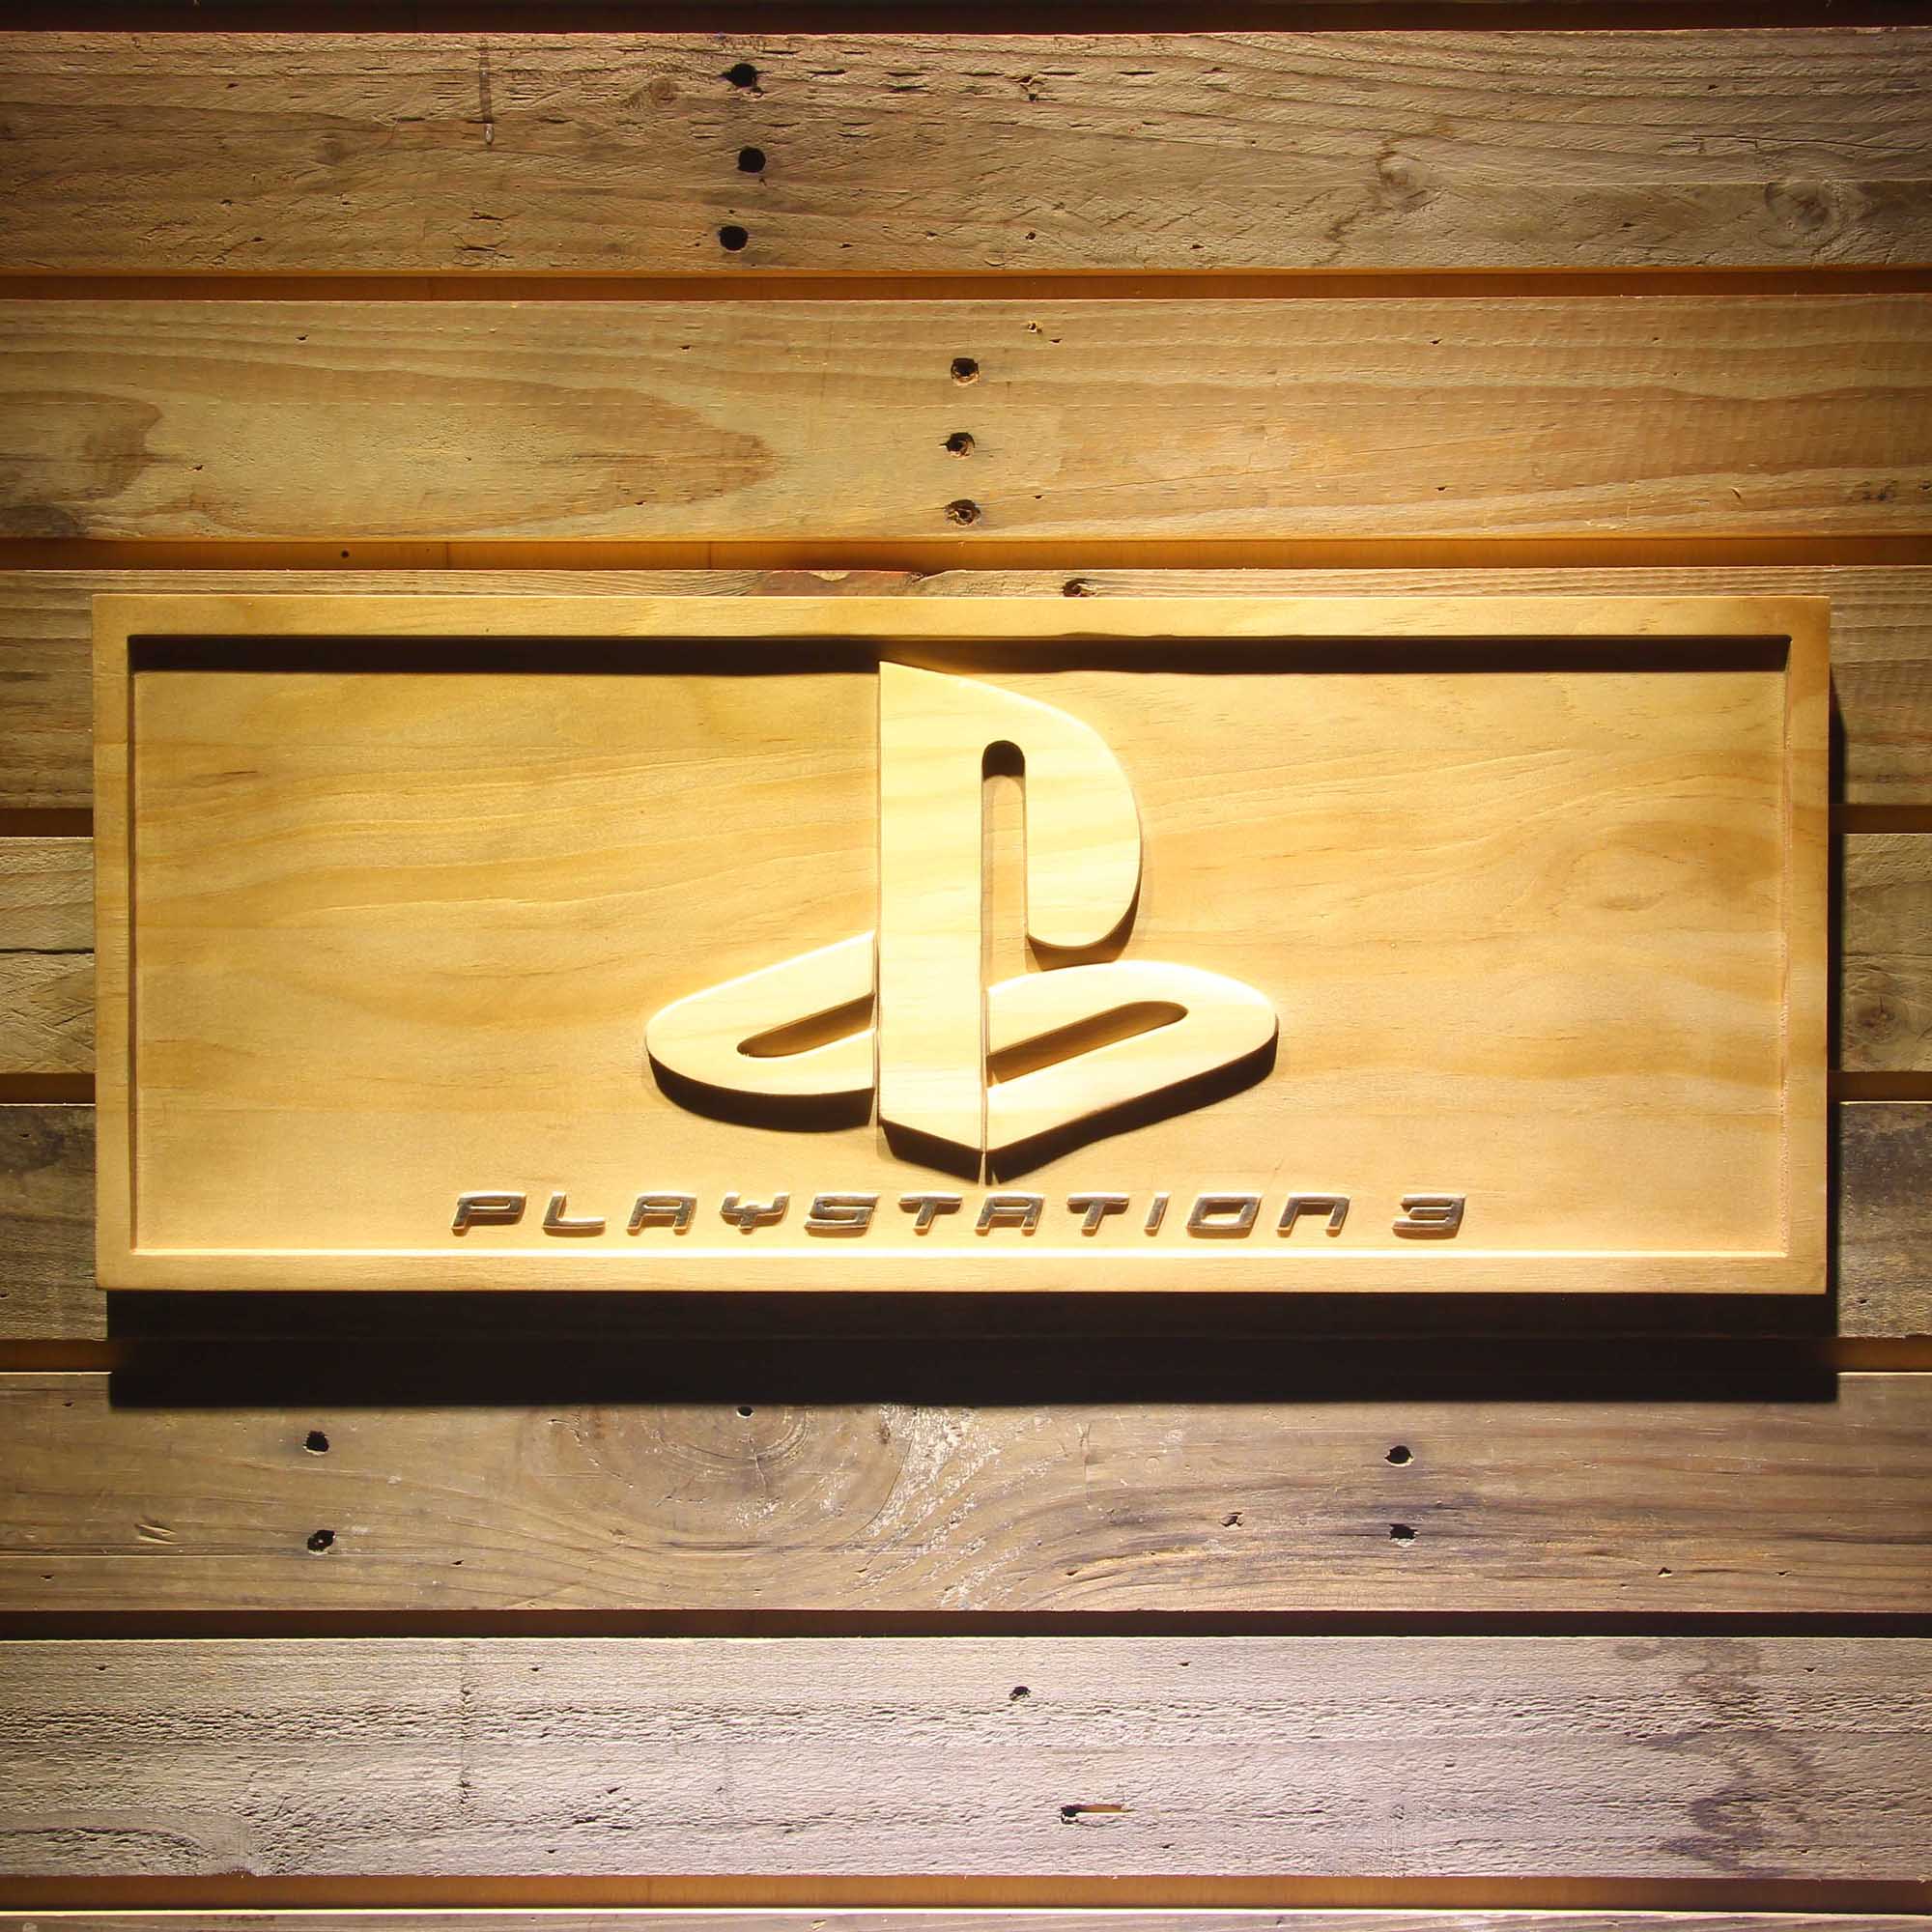 Playstation,PS,PS2,PS3,PS4,PS5 3D Solid Wooden Craving Sign